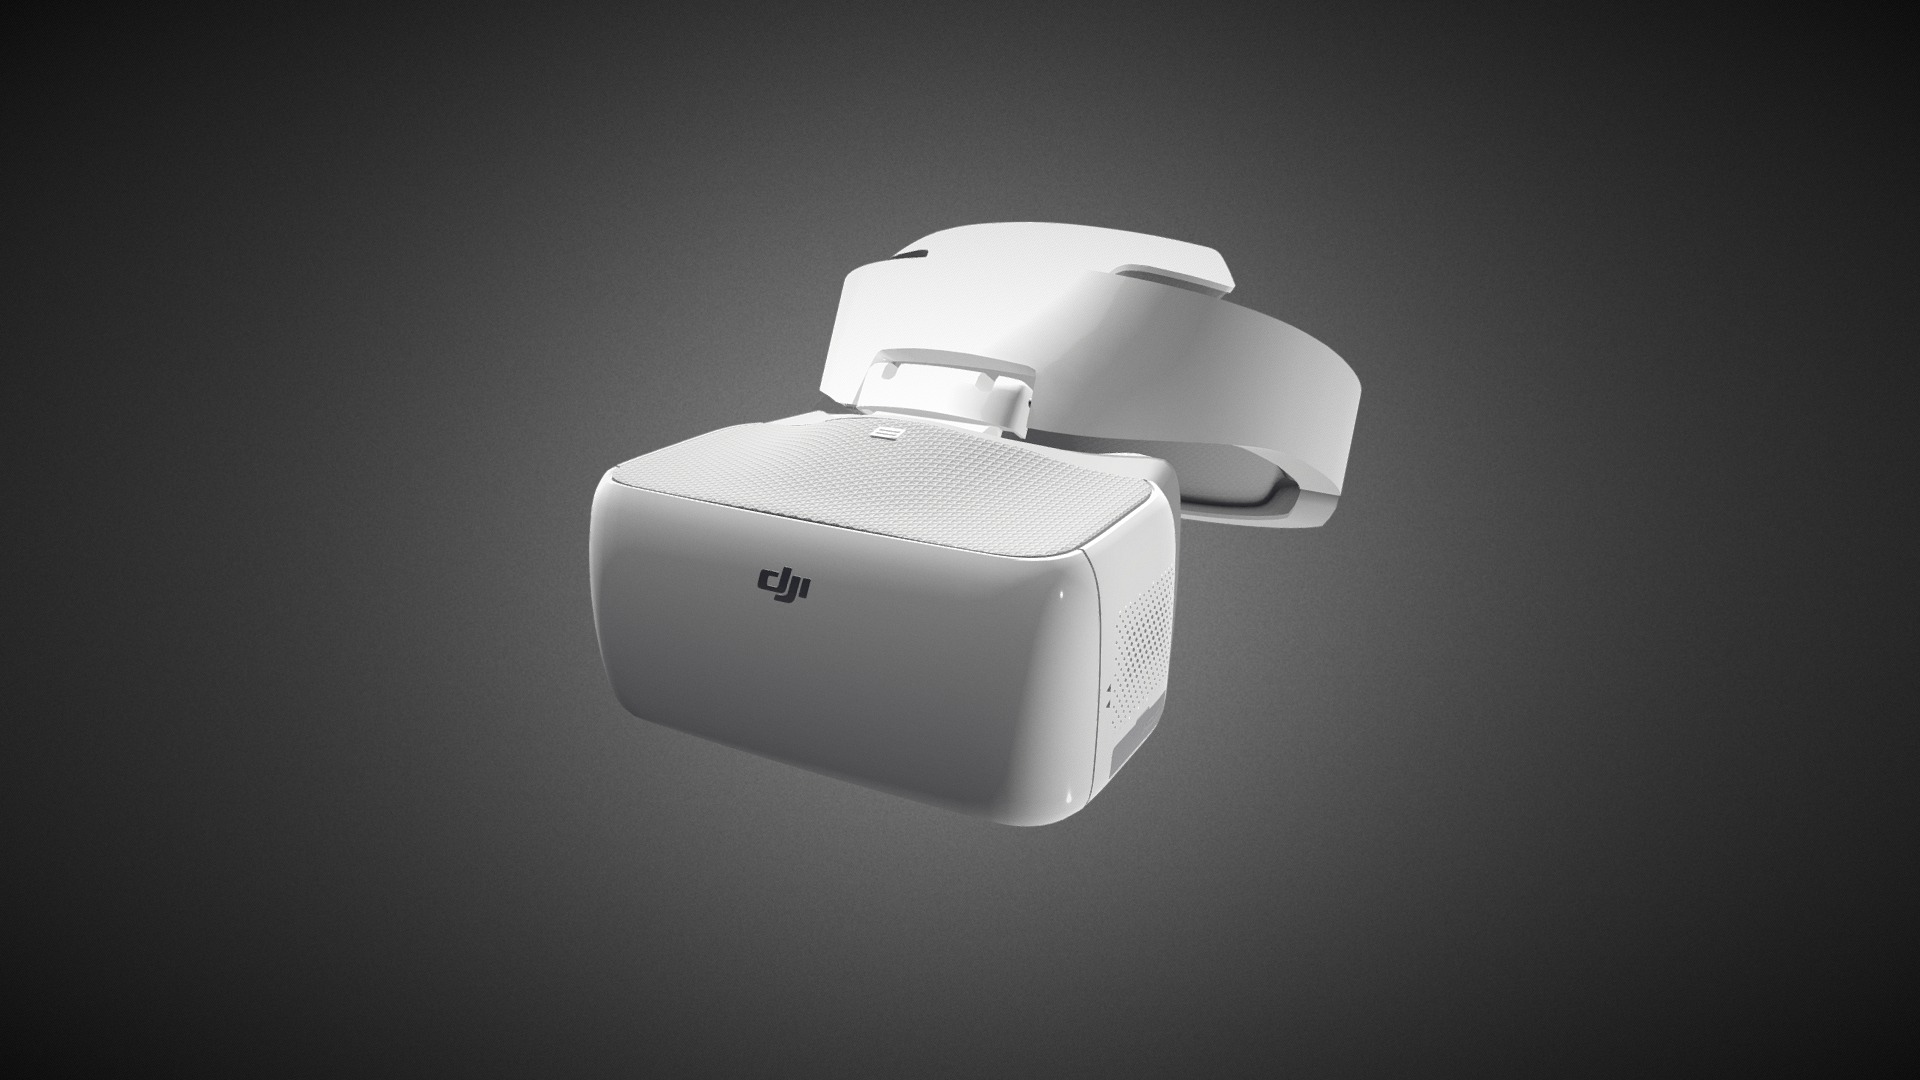 3D model DJI Goggles for Element 3D - This is a 3D model of the DJI Goggles for Element 3D. The 3D model is about a white and grey computer mouse.